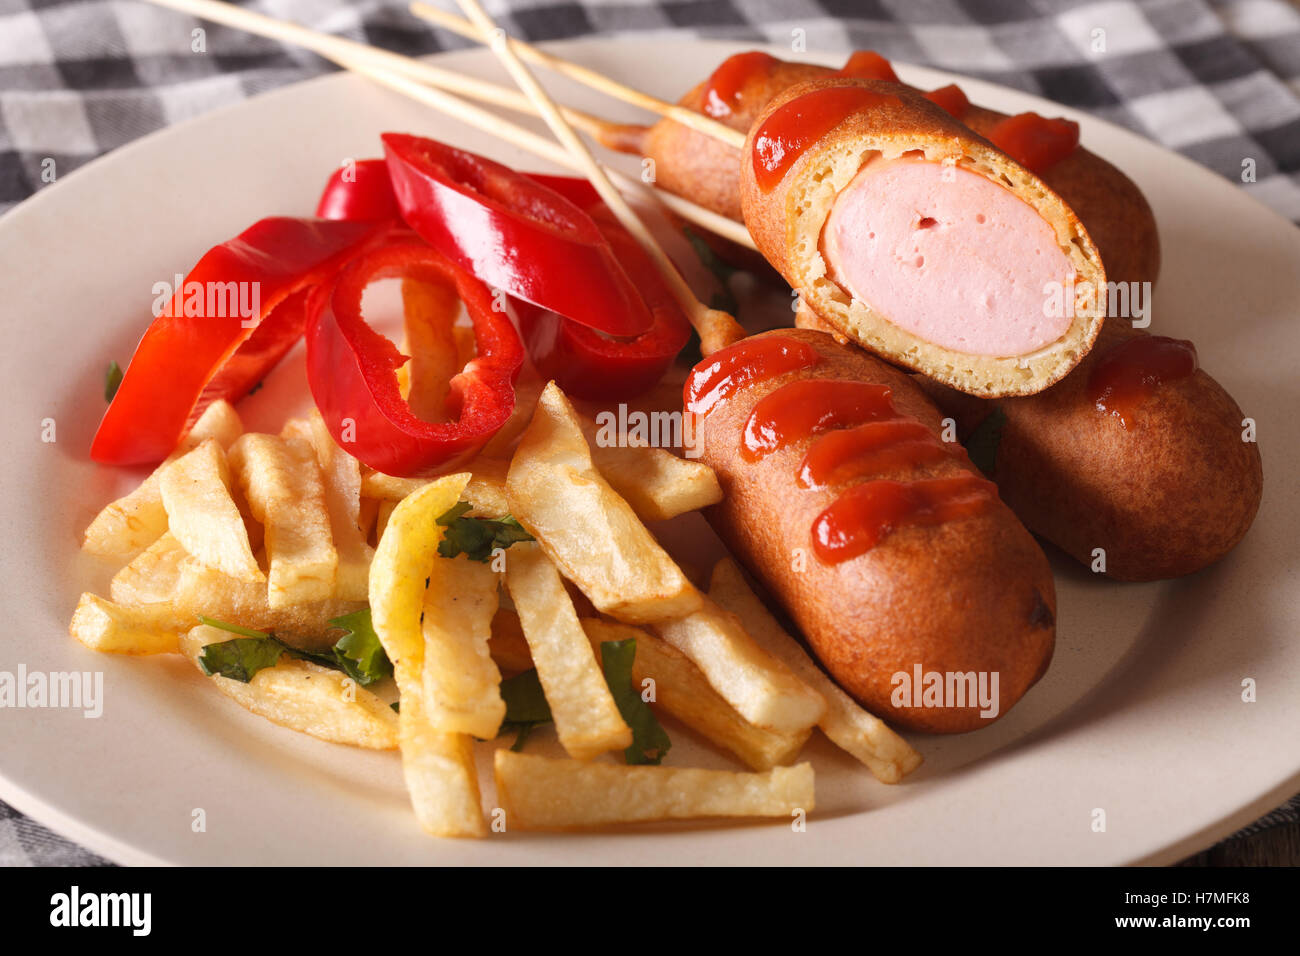 Corn dog with fries and vegetables on a plate close-up on the table. Horizontal Stock Photo